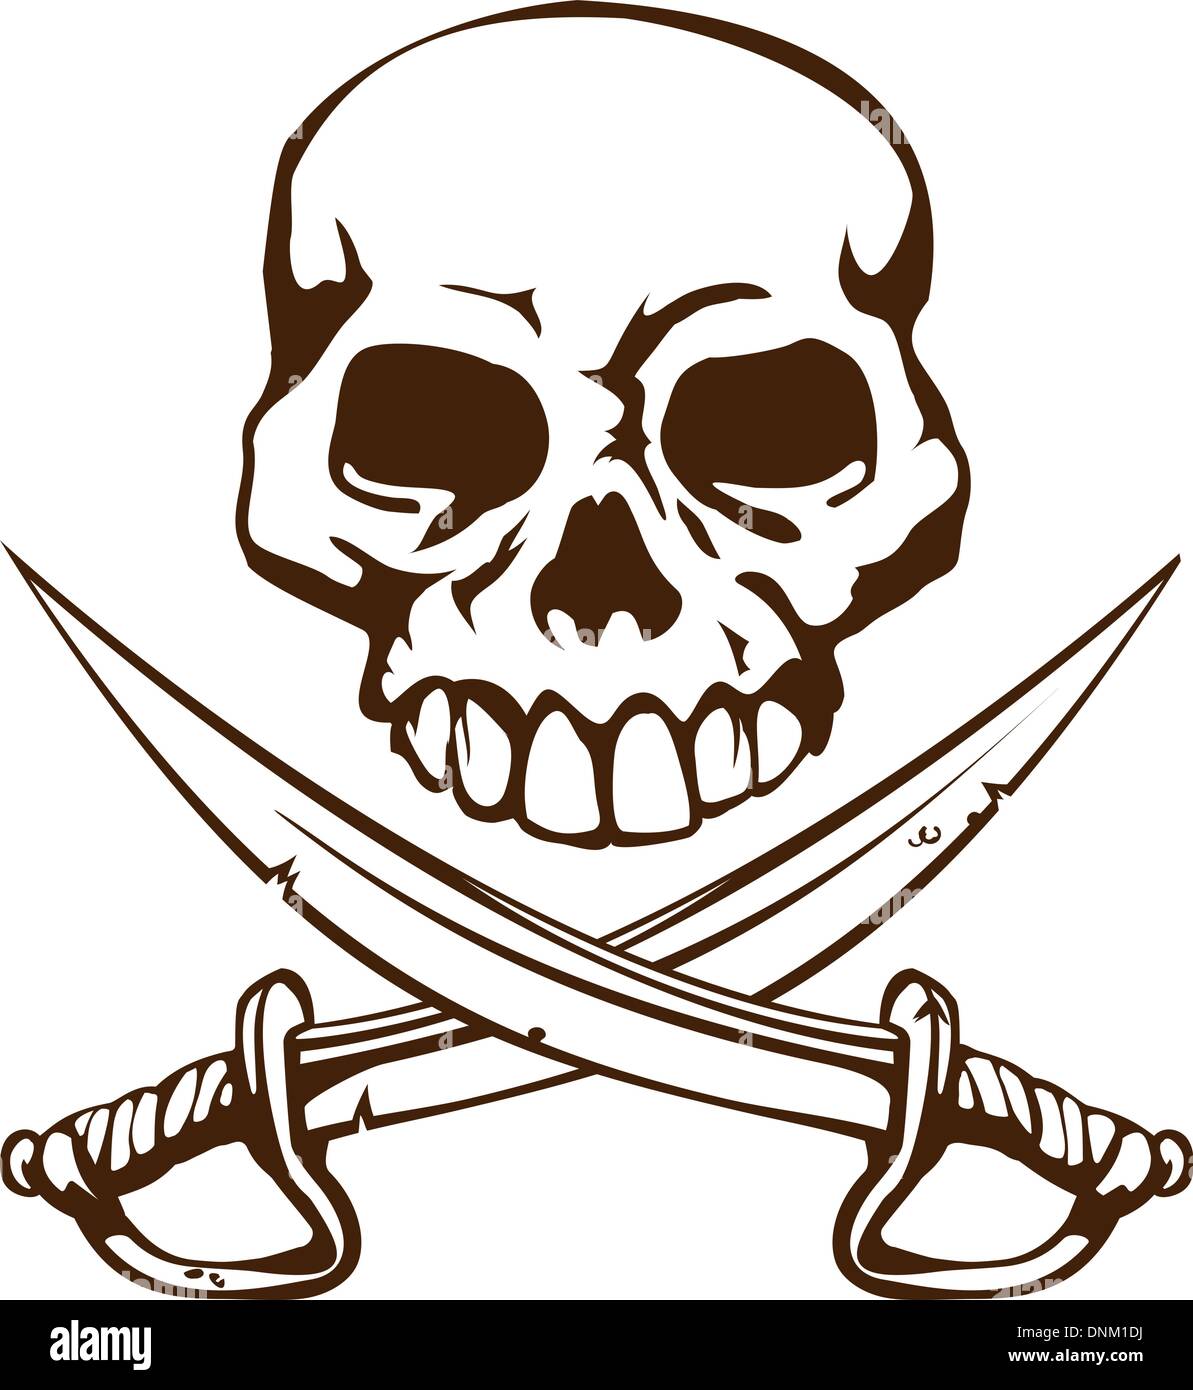 A Pirate Skull And Crossed Swords Symbol Stock Vector Image And Art Alamy